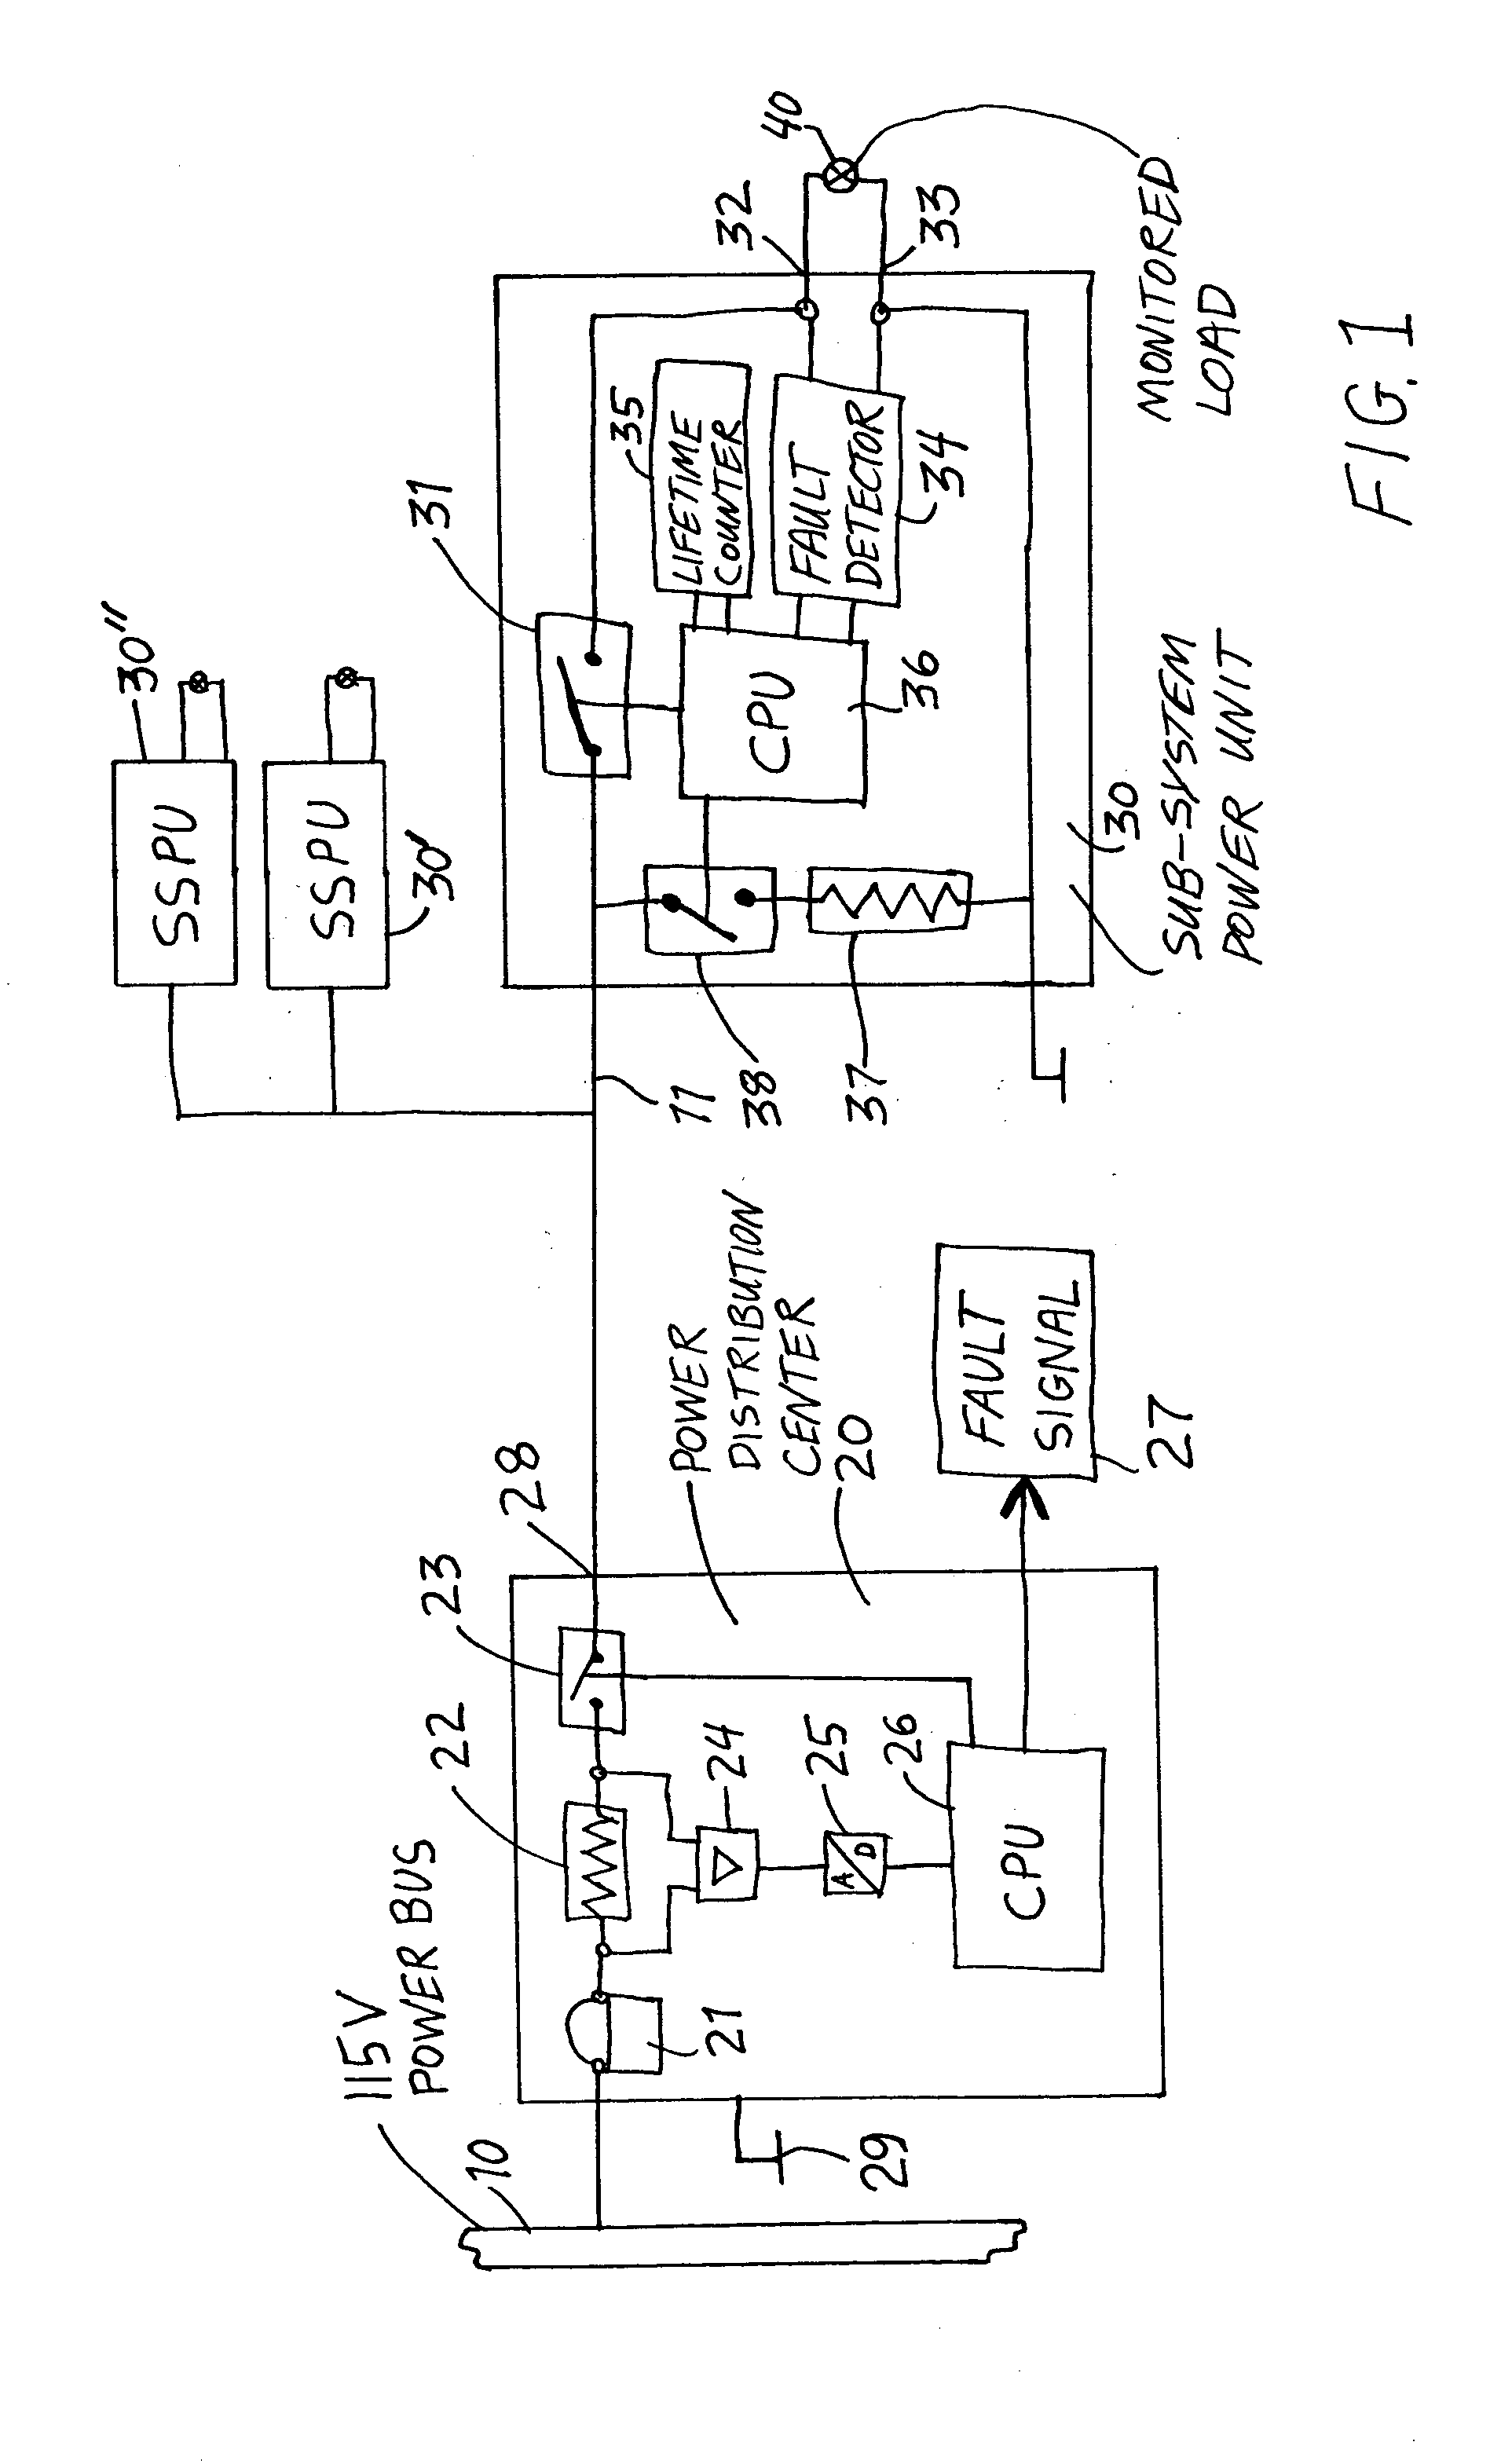 System and method for detecting faults in an aircraft electrical power system